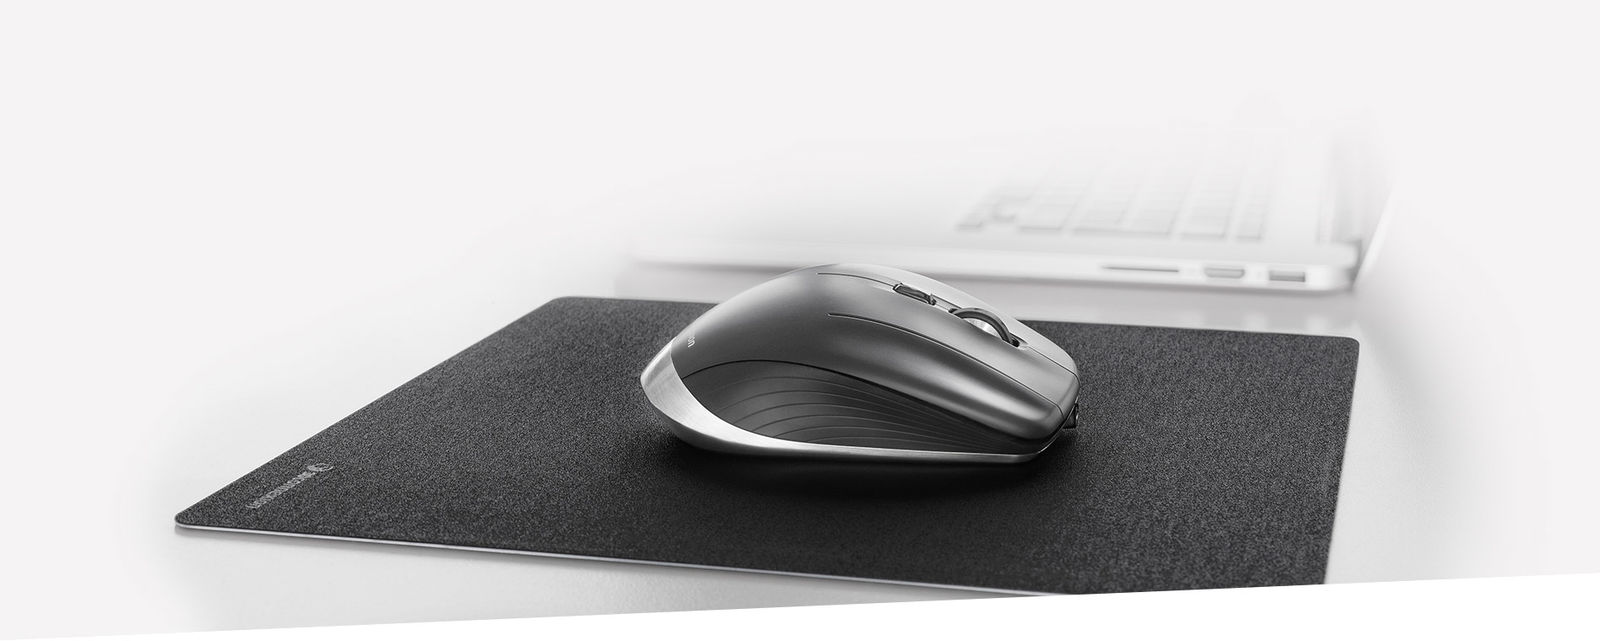 CadMouse Pad Compact